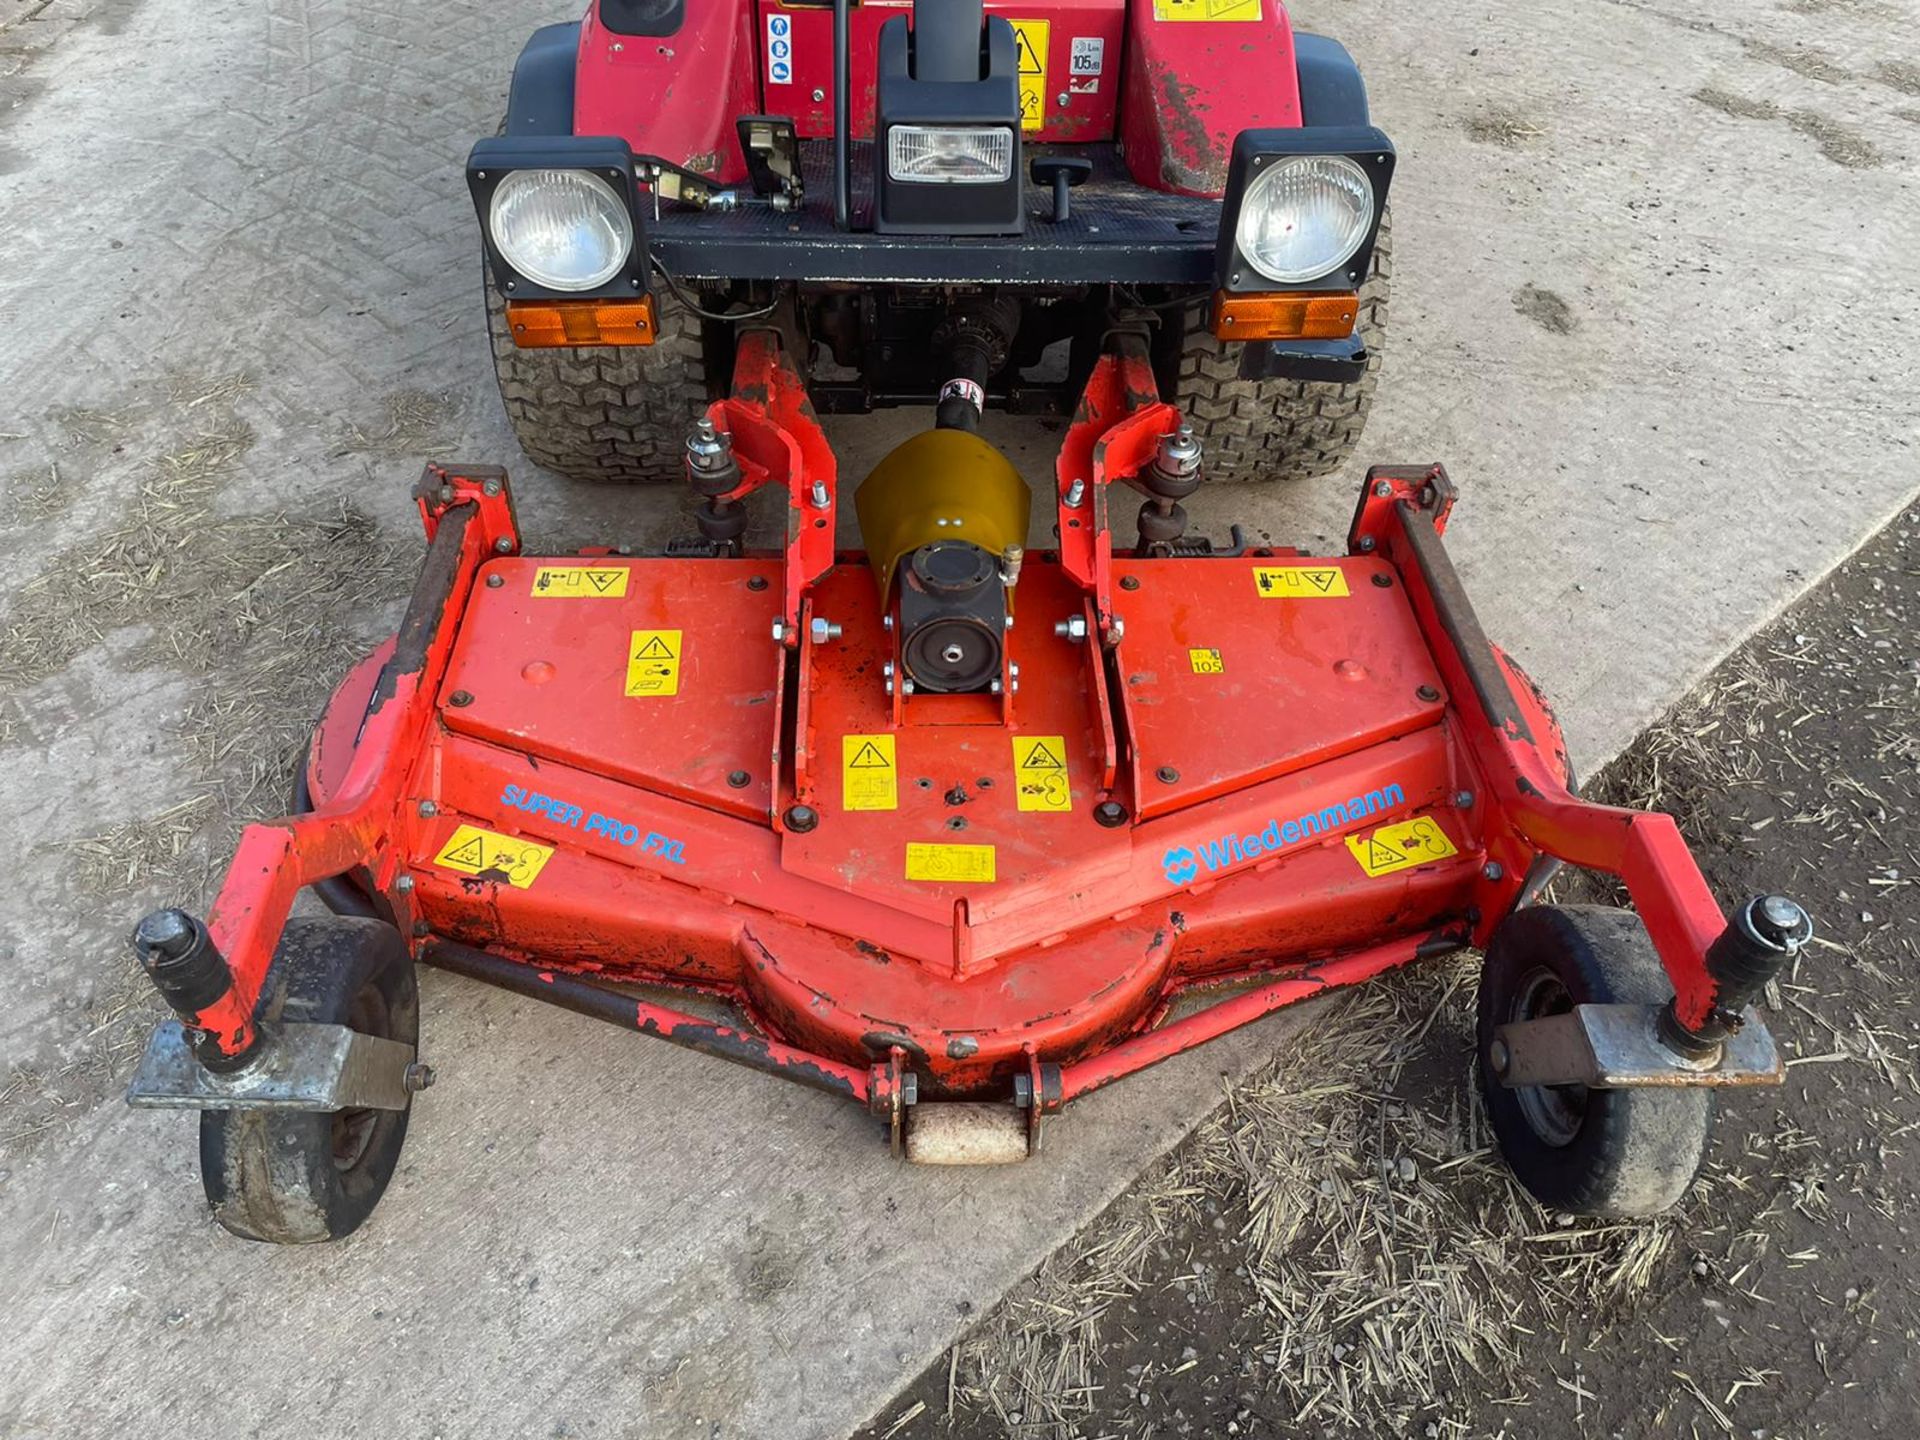 2012 SHIBAURA CM374 OUTFRONT RIDE ON MOWER, RUNS, DRIVES AND CUTS, IN USED BUT GOOD CONDITION - Image 6 of 12